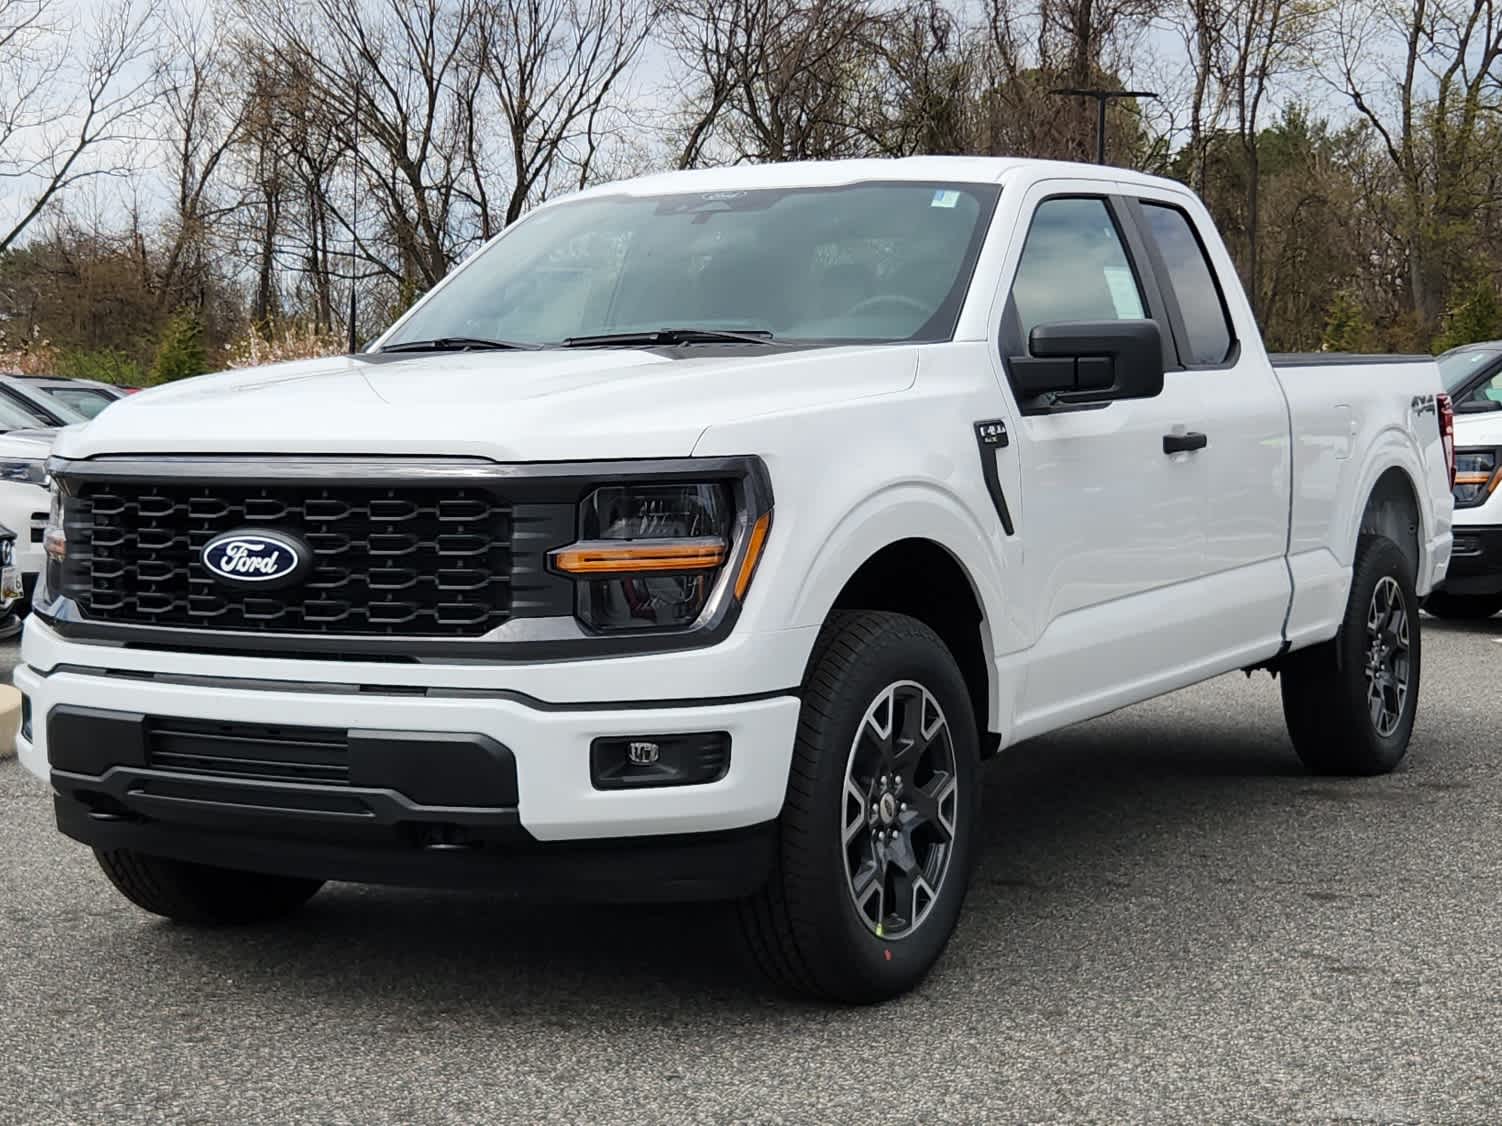 New Ford F-150 | Ford Pickup Trucks at Hertrich Ford of Elkton